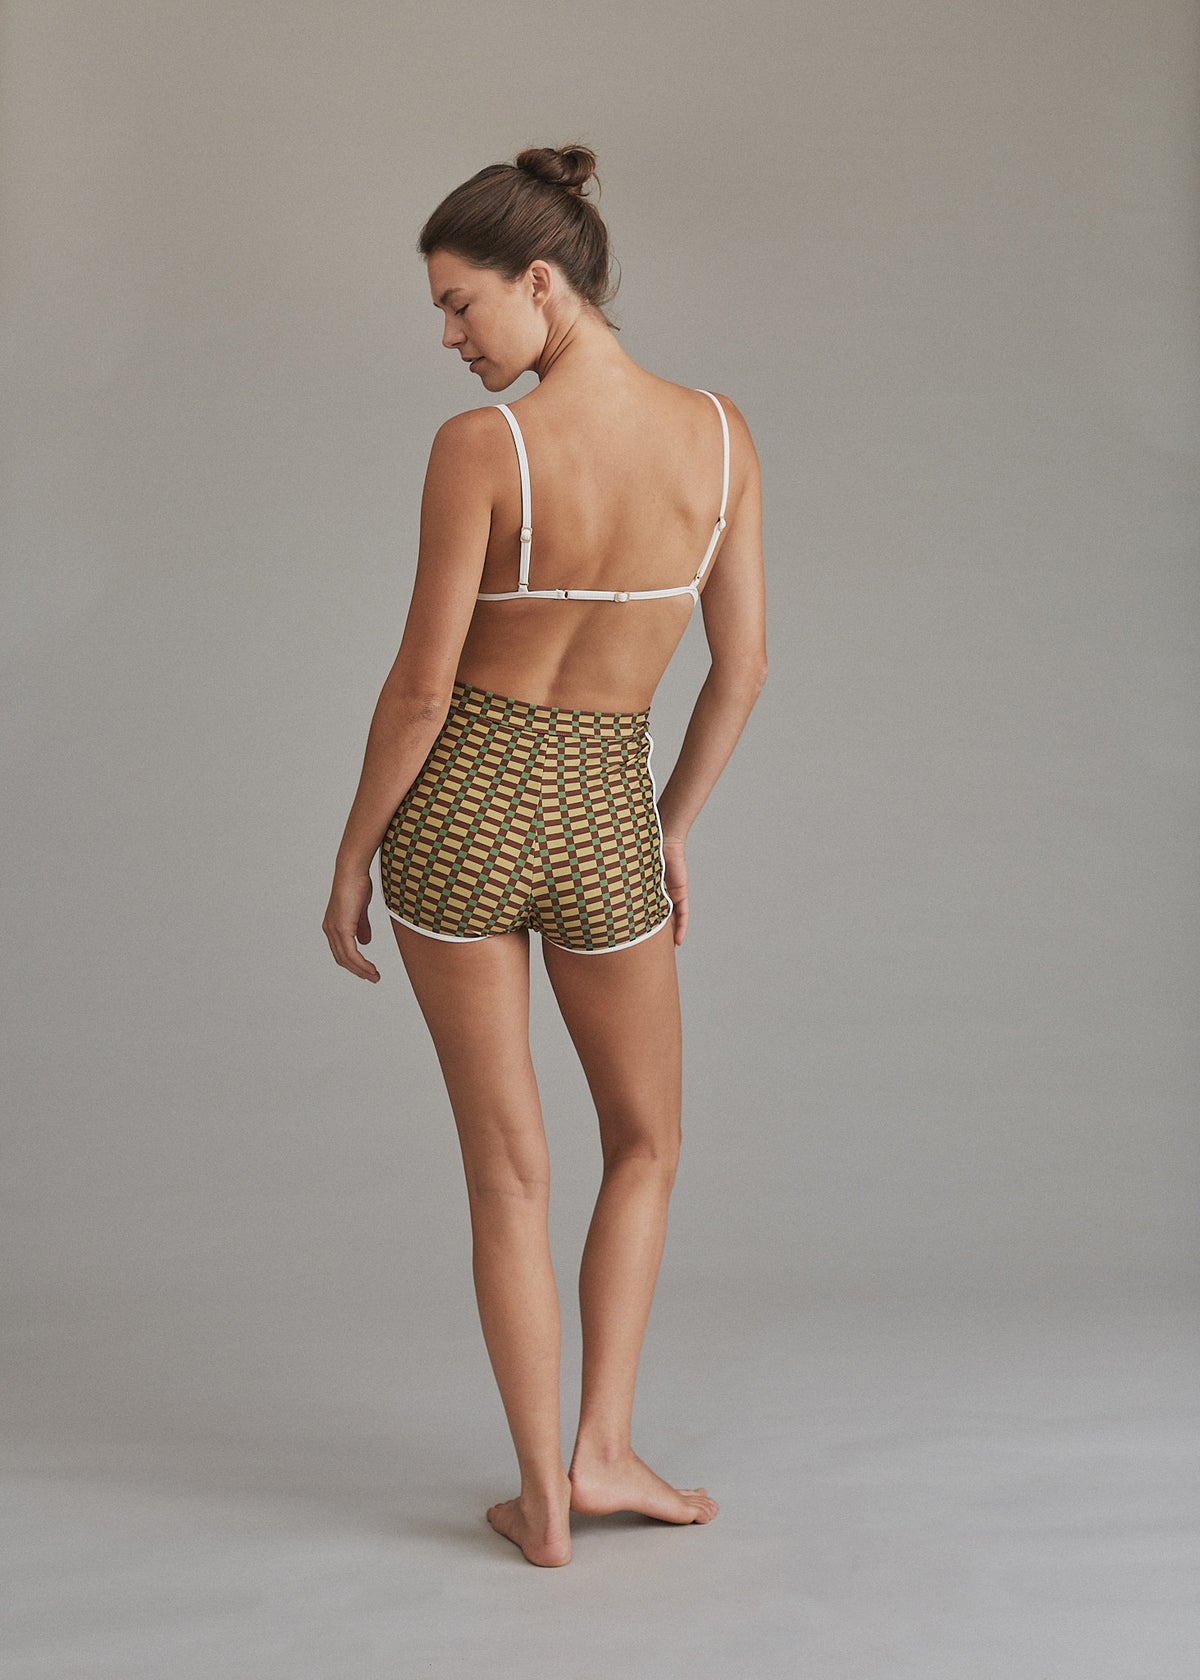 Acacia Swimwear Piped Tommy bottoms |Vahine